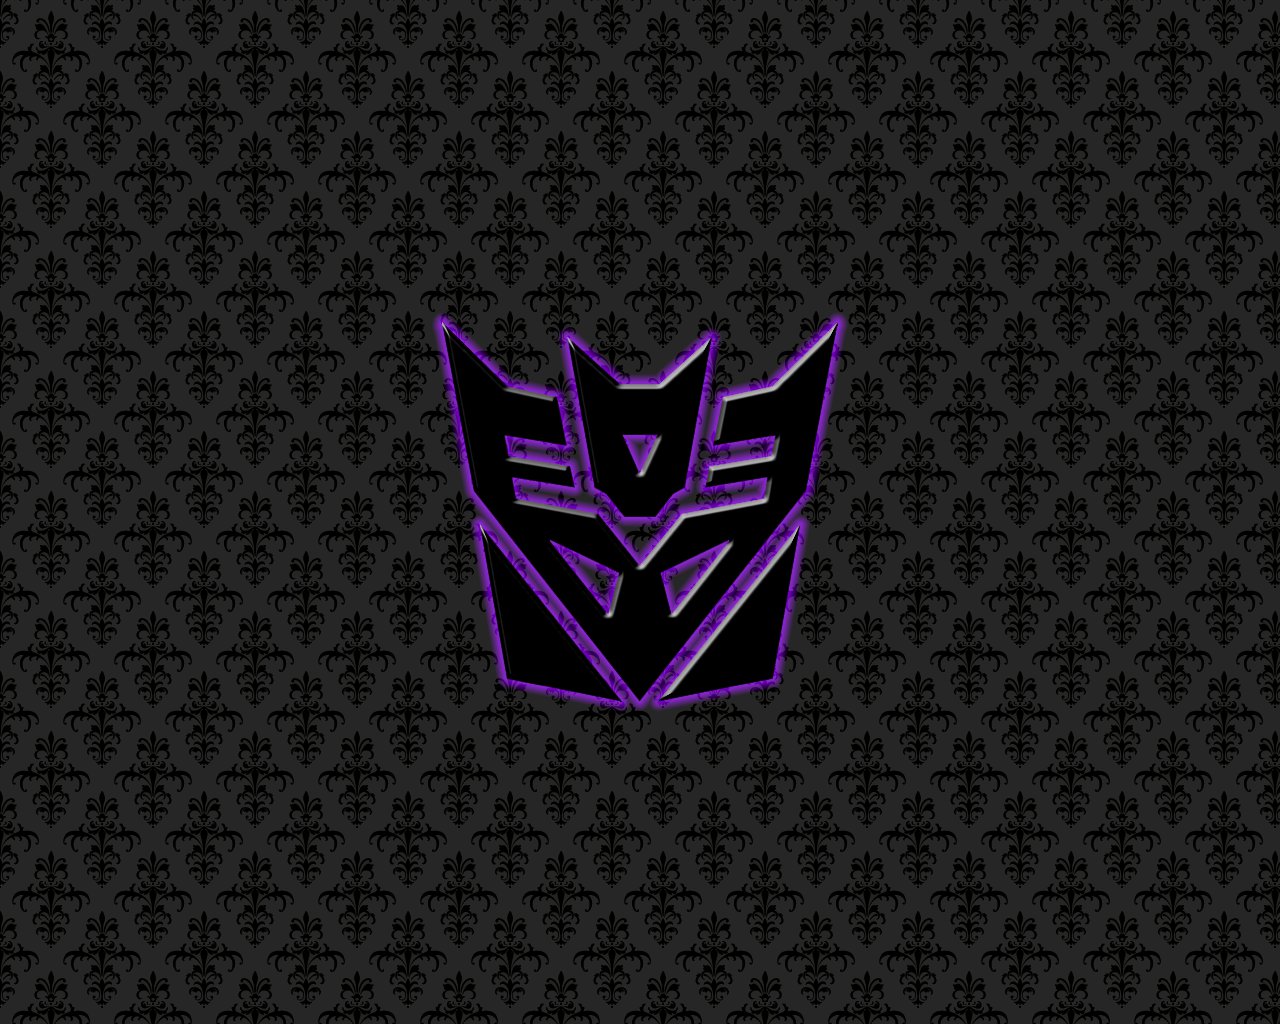 Decepticons Wallpaper 67 pictures